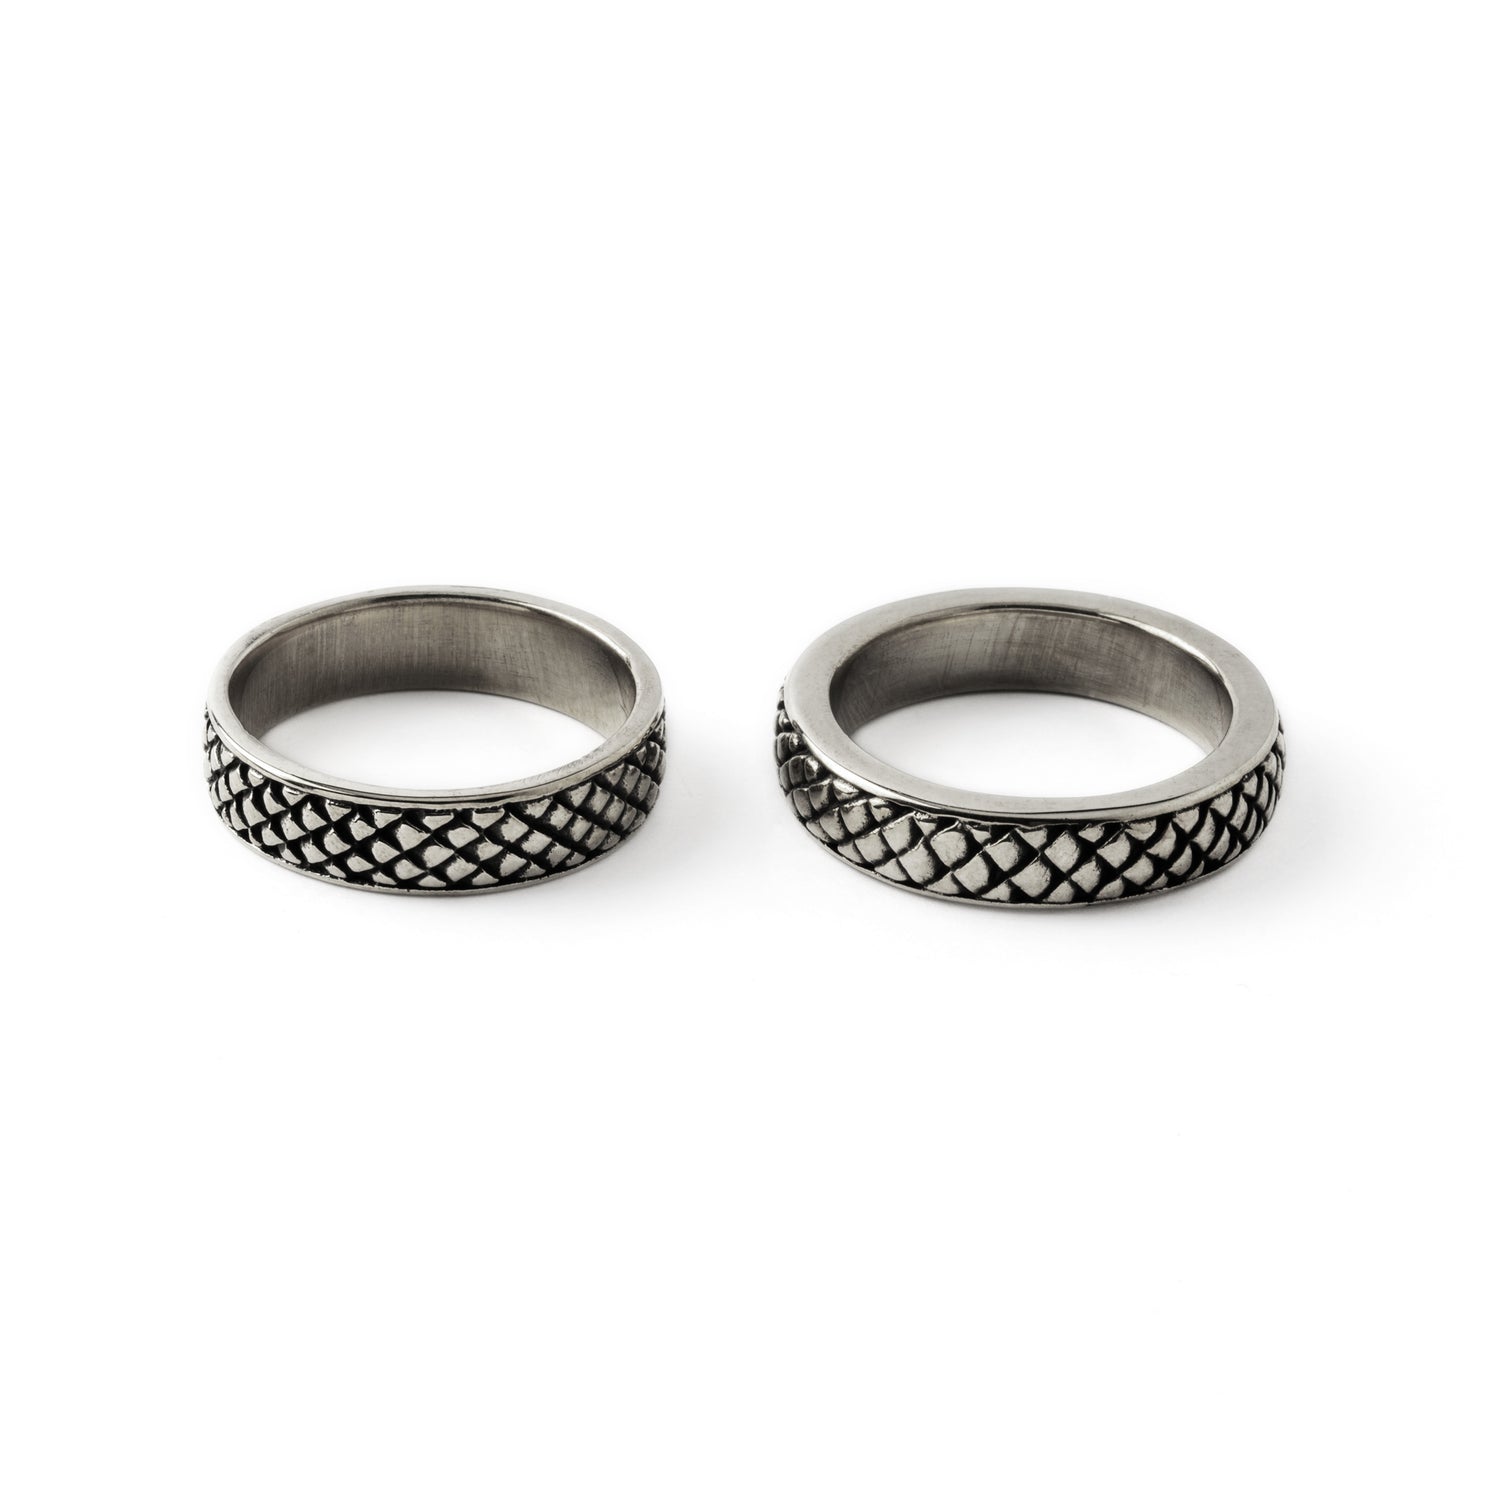 Rebirth- men and women designs silver band rings with snake scales frontal view